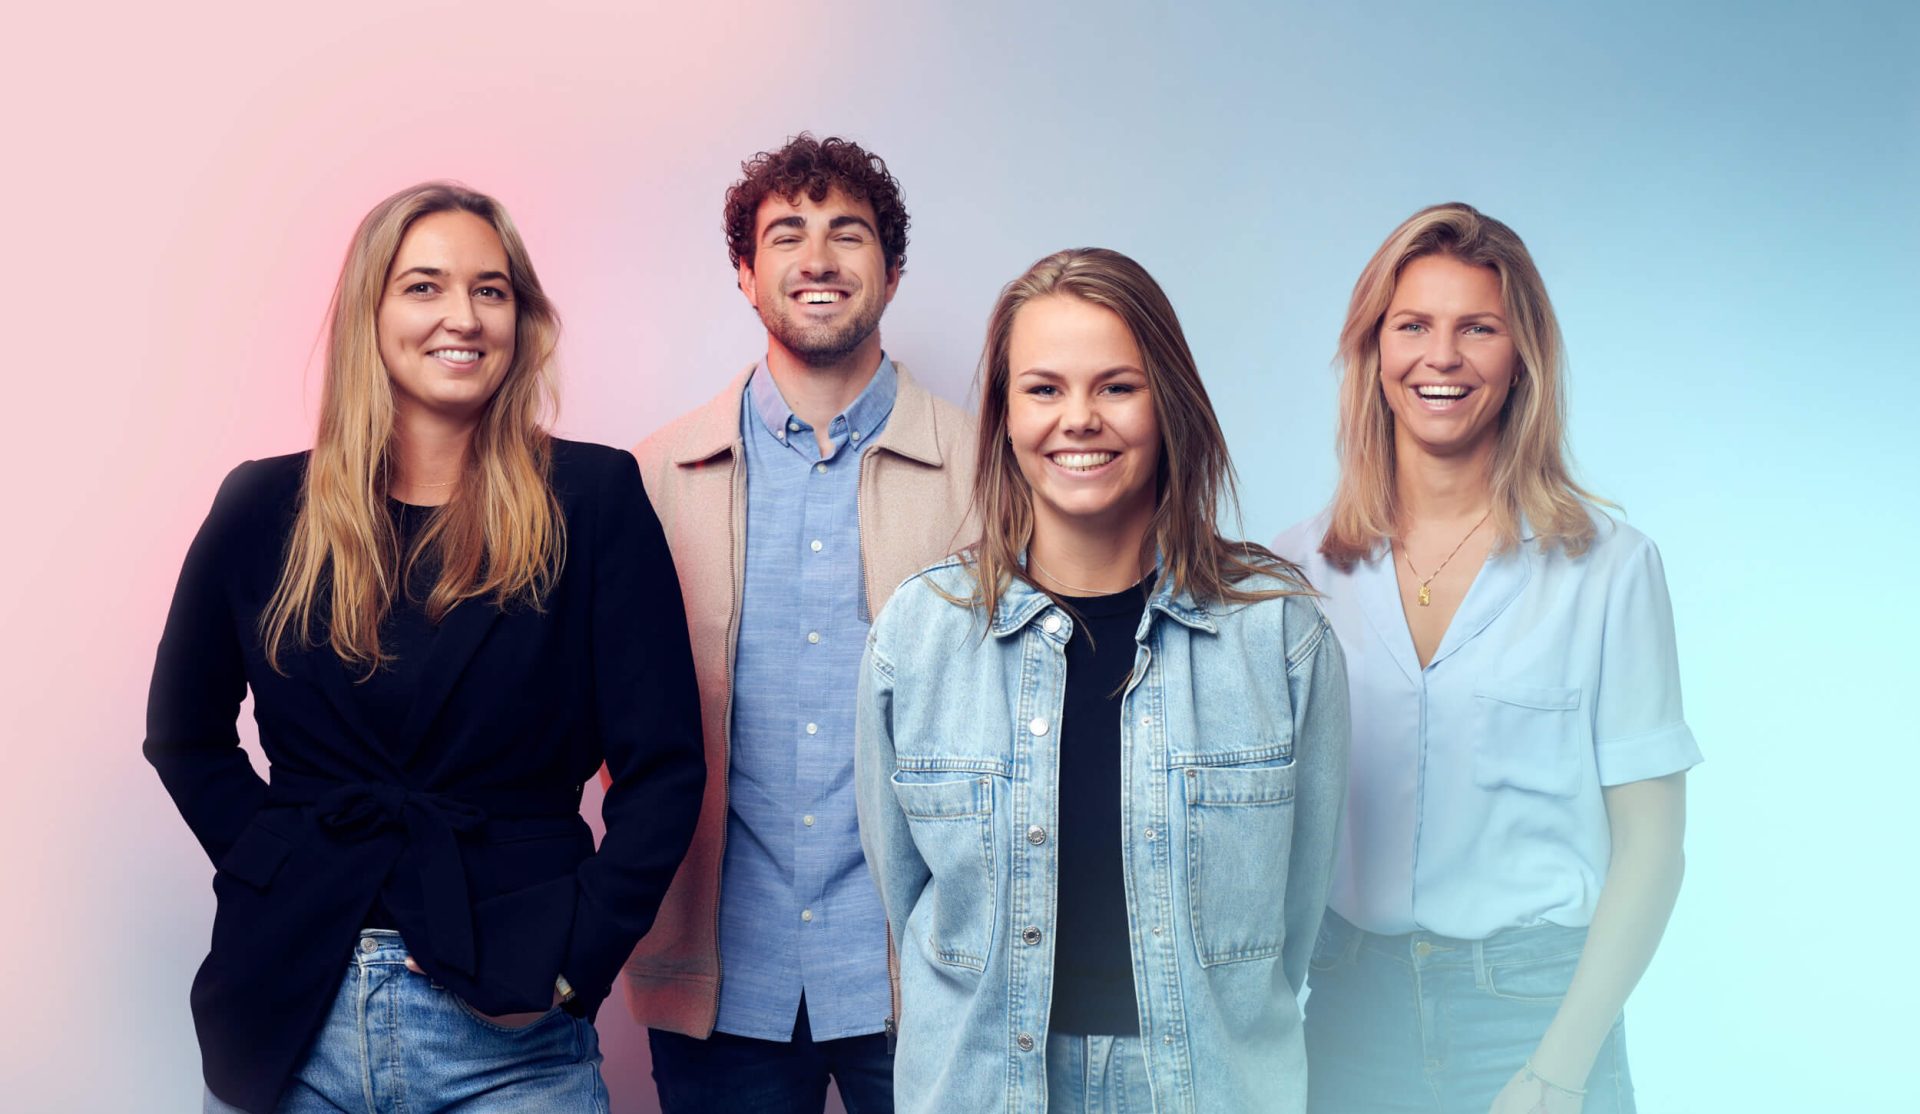 dit is leaped - online marketing traineeship